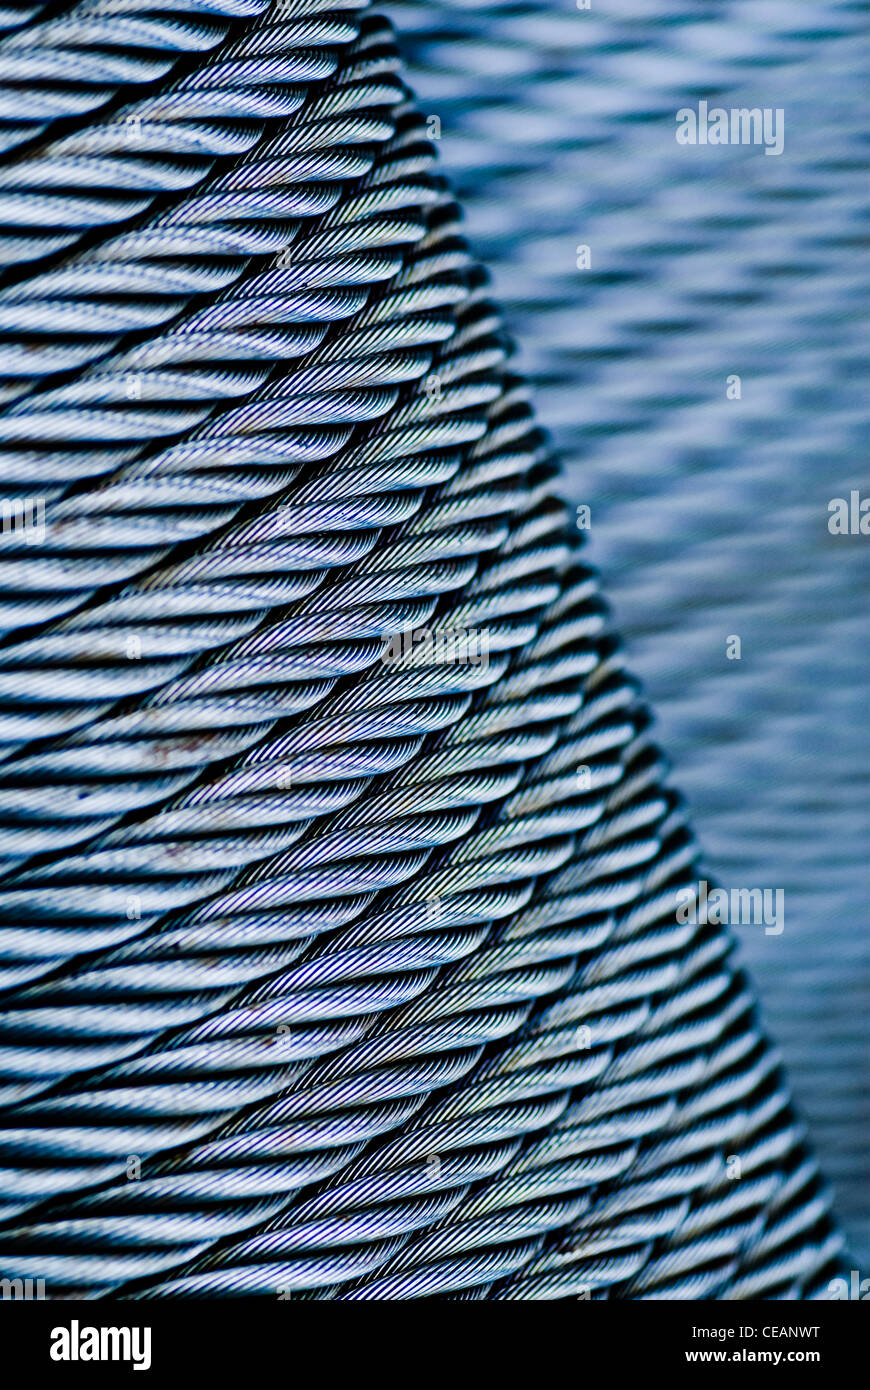 Close-up of steel wire Stock Photo